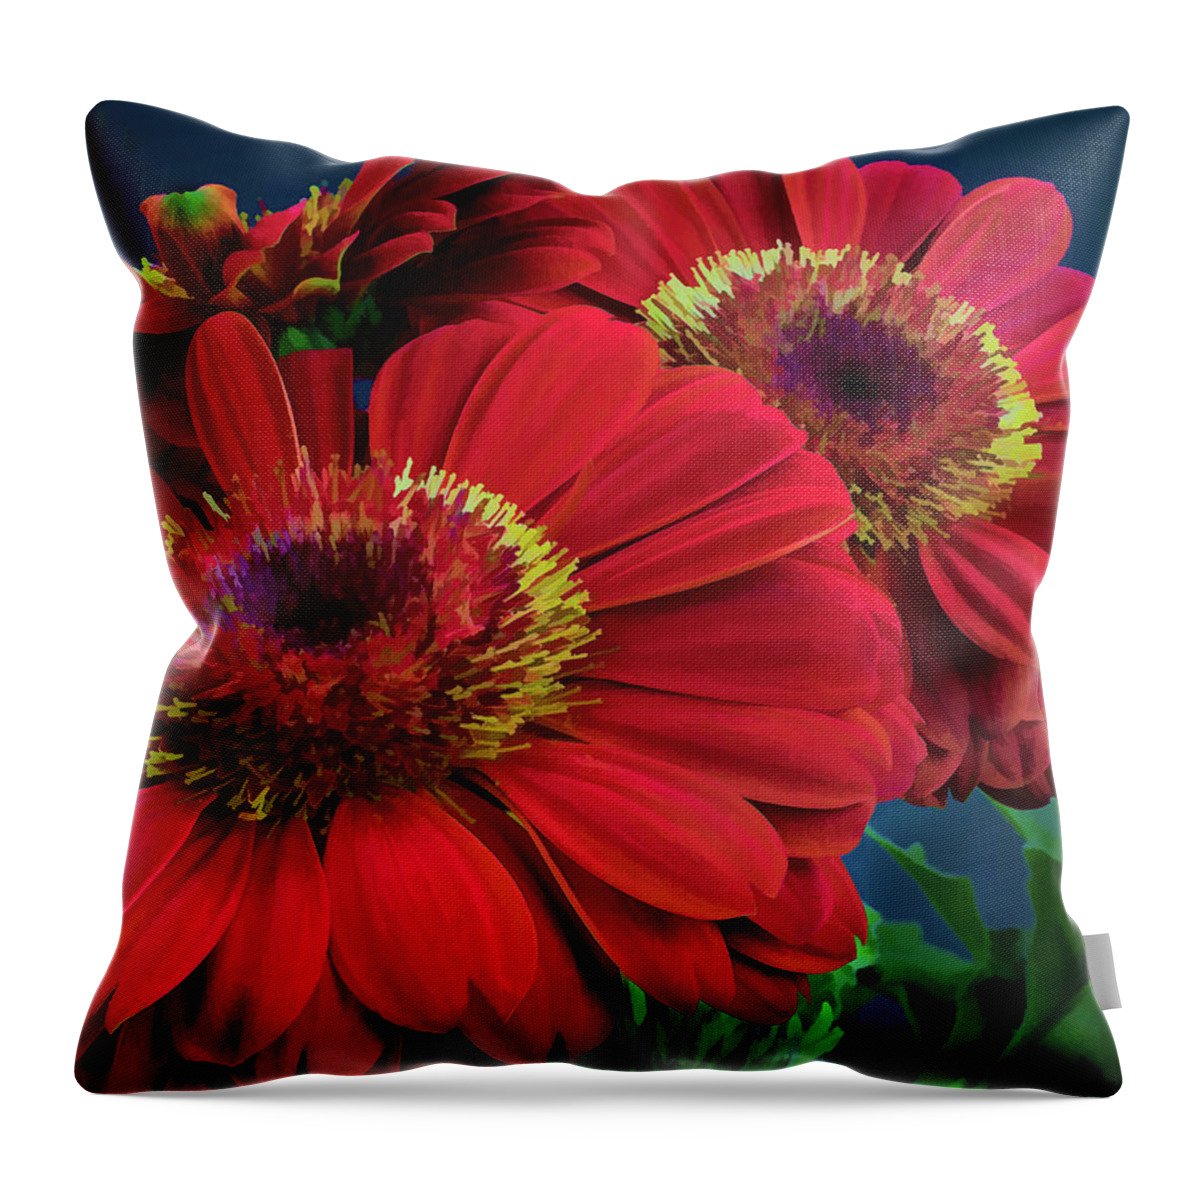 Flowers Throw Pillow featuring the photograph Red Gerbera Daisy by David Thompsen